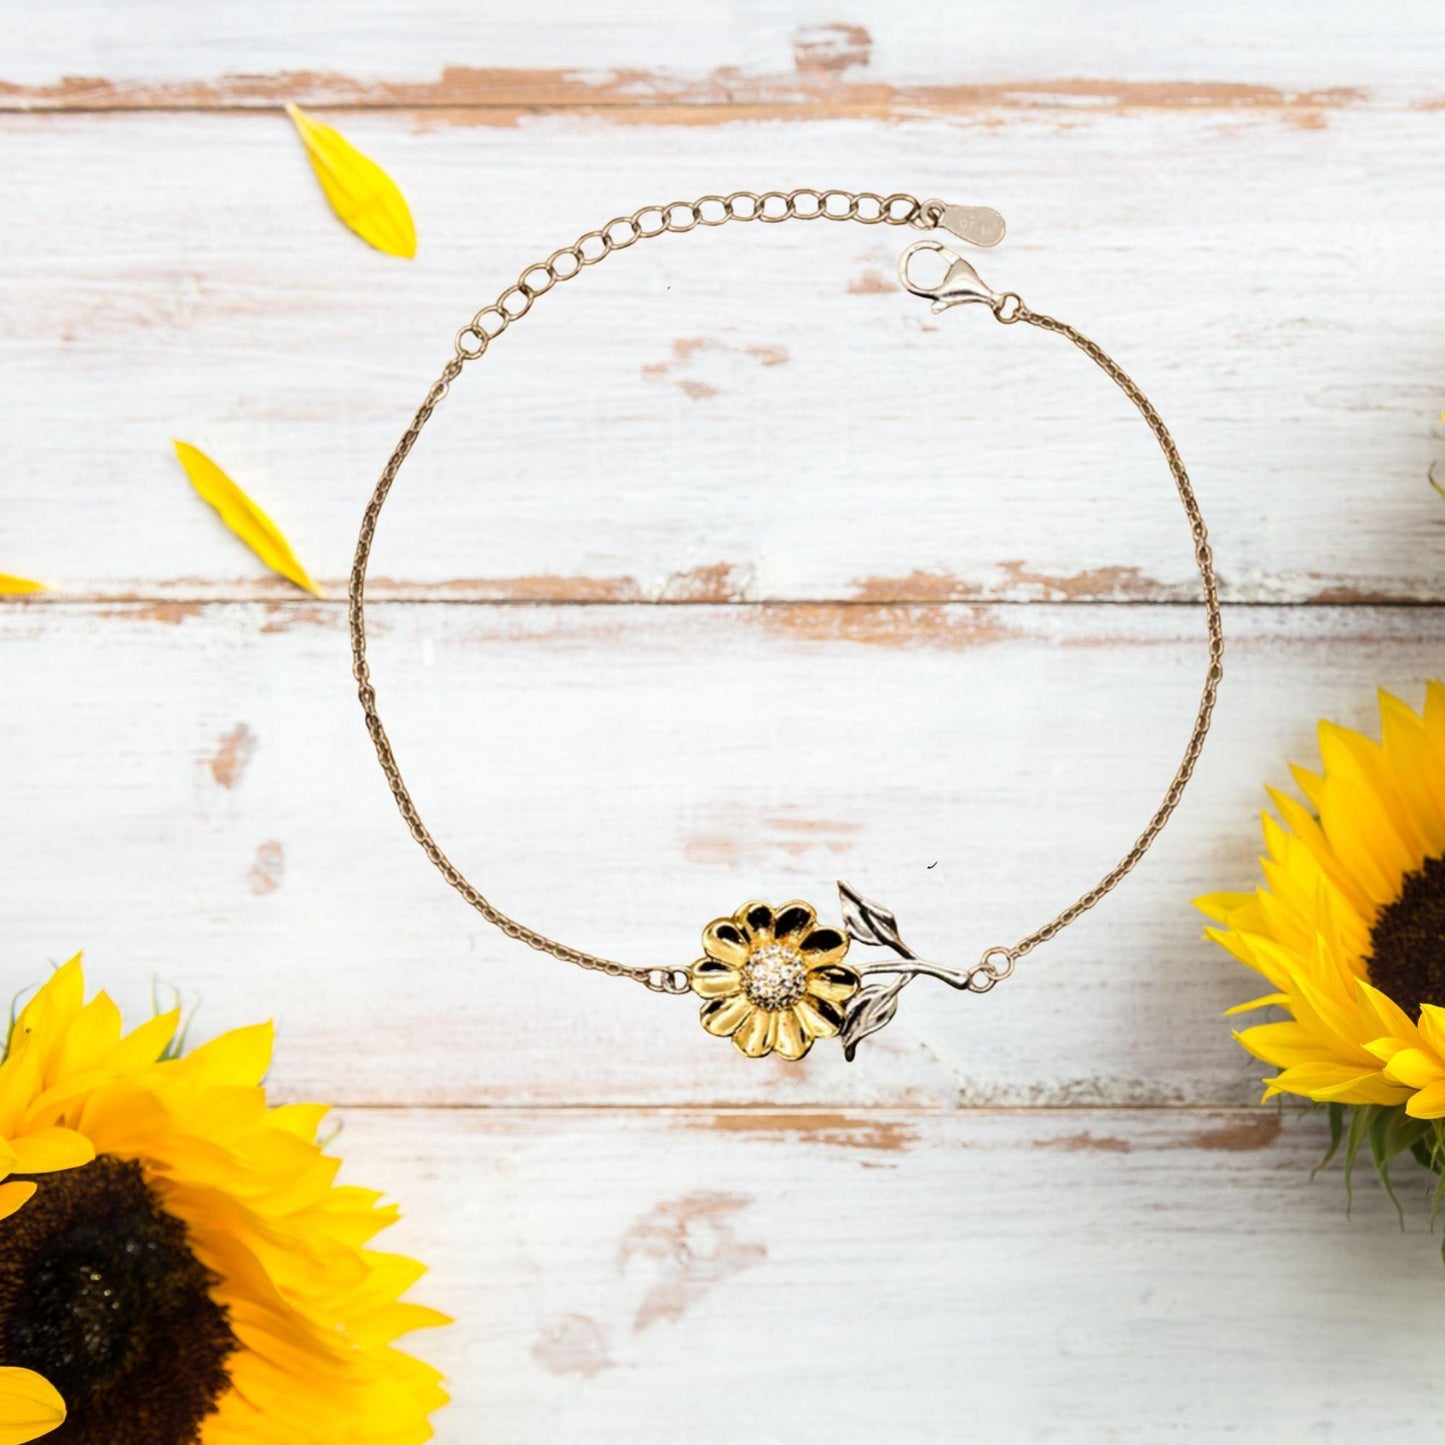 Logger Sunflower Bracelet - Thanks for being who you are - Birthday Christmas Jewelry Gifts Coworkers Colleague Boss - Mallard Moon Gift Shop